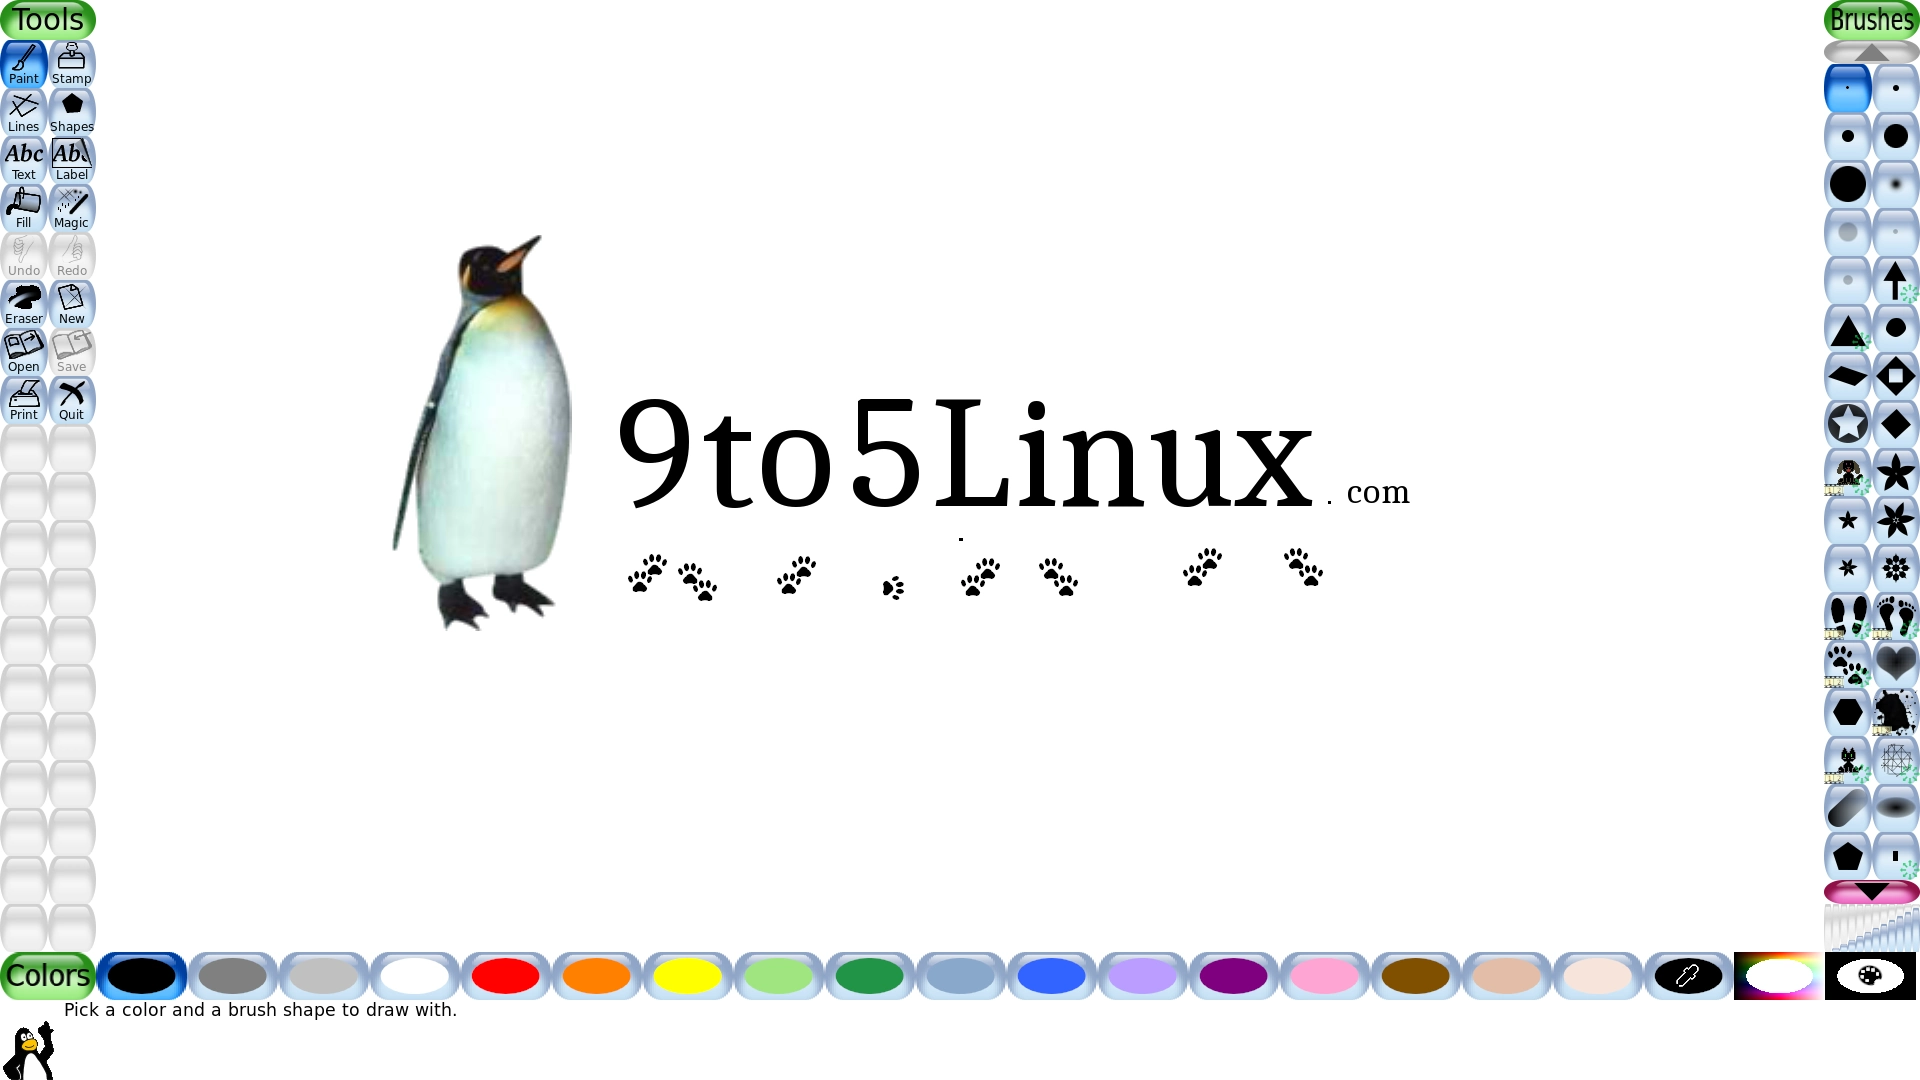 Tux Paint 0.9.29 Open-Source Painting App Brings 15 New Magic Tools, Spinning Stamps